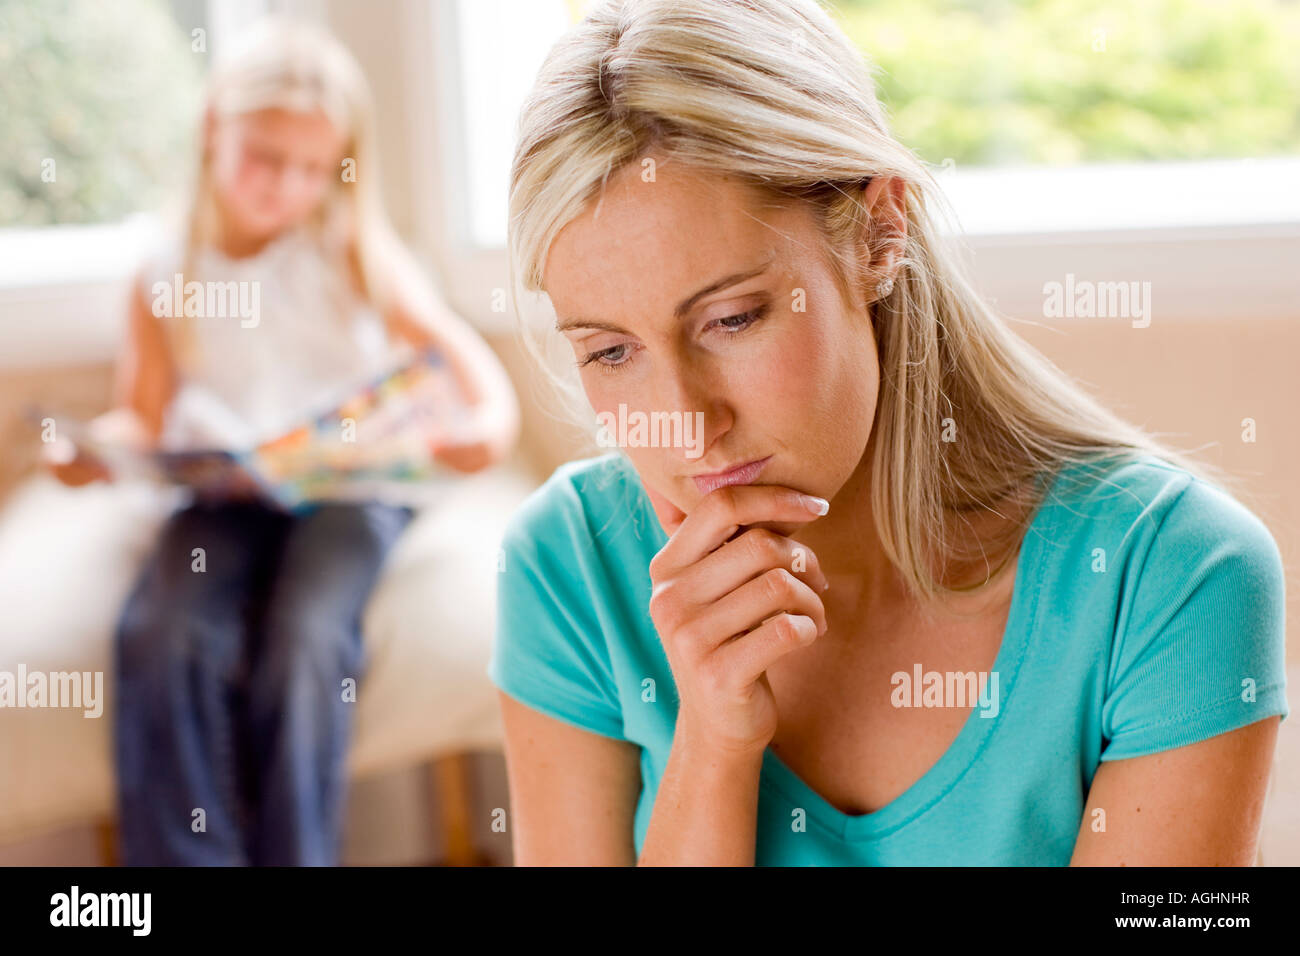 Mother looking worried with her daughter in the background Stock Photo